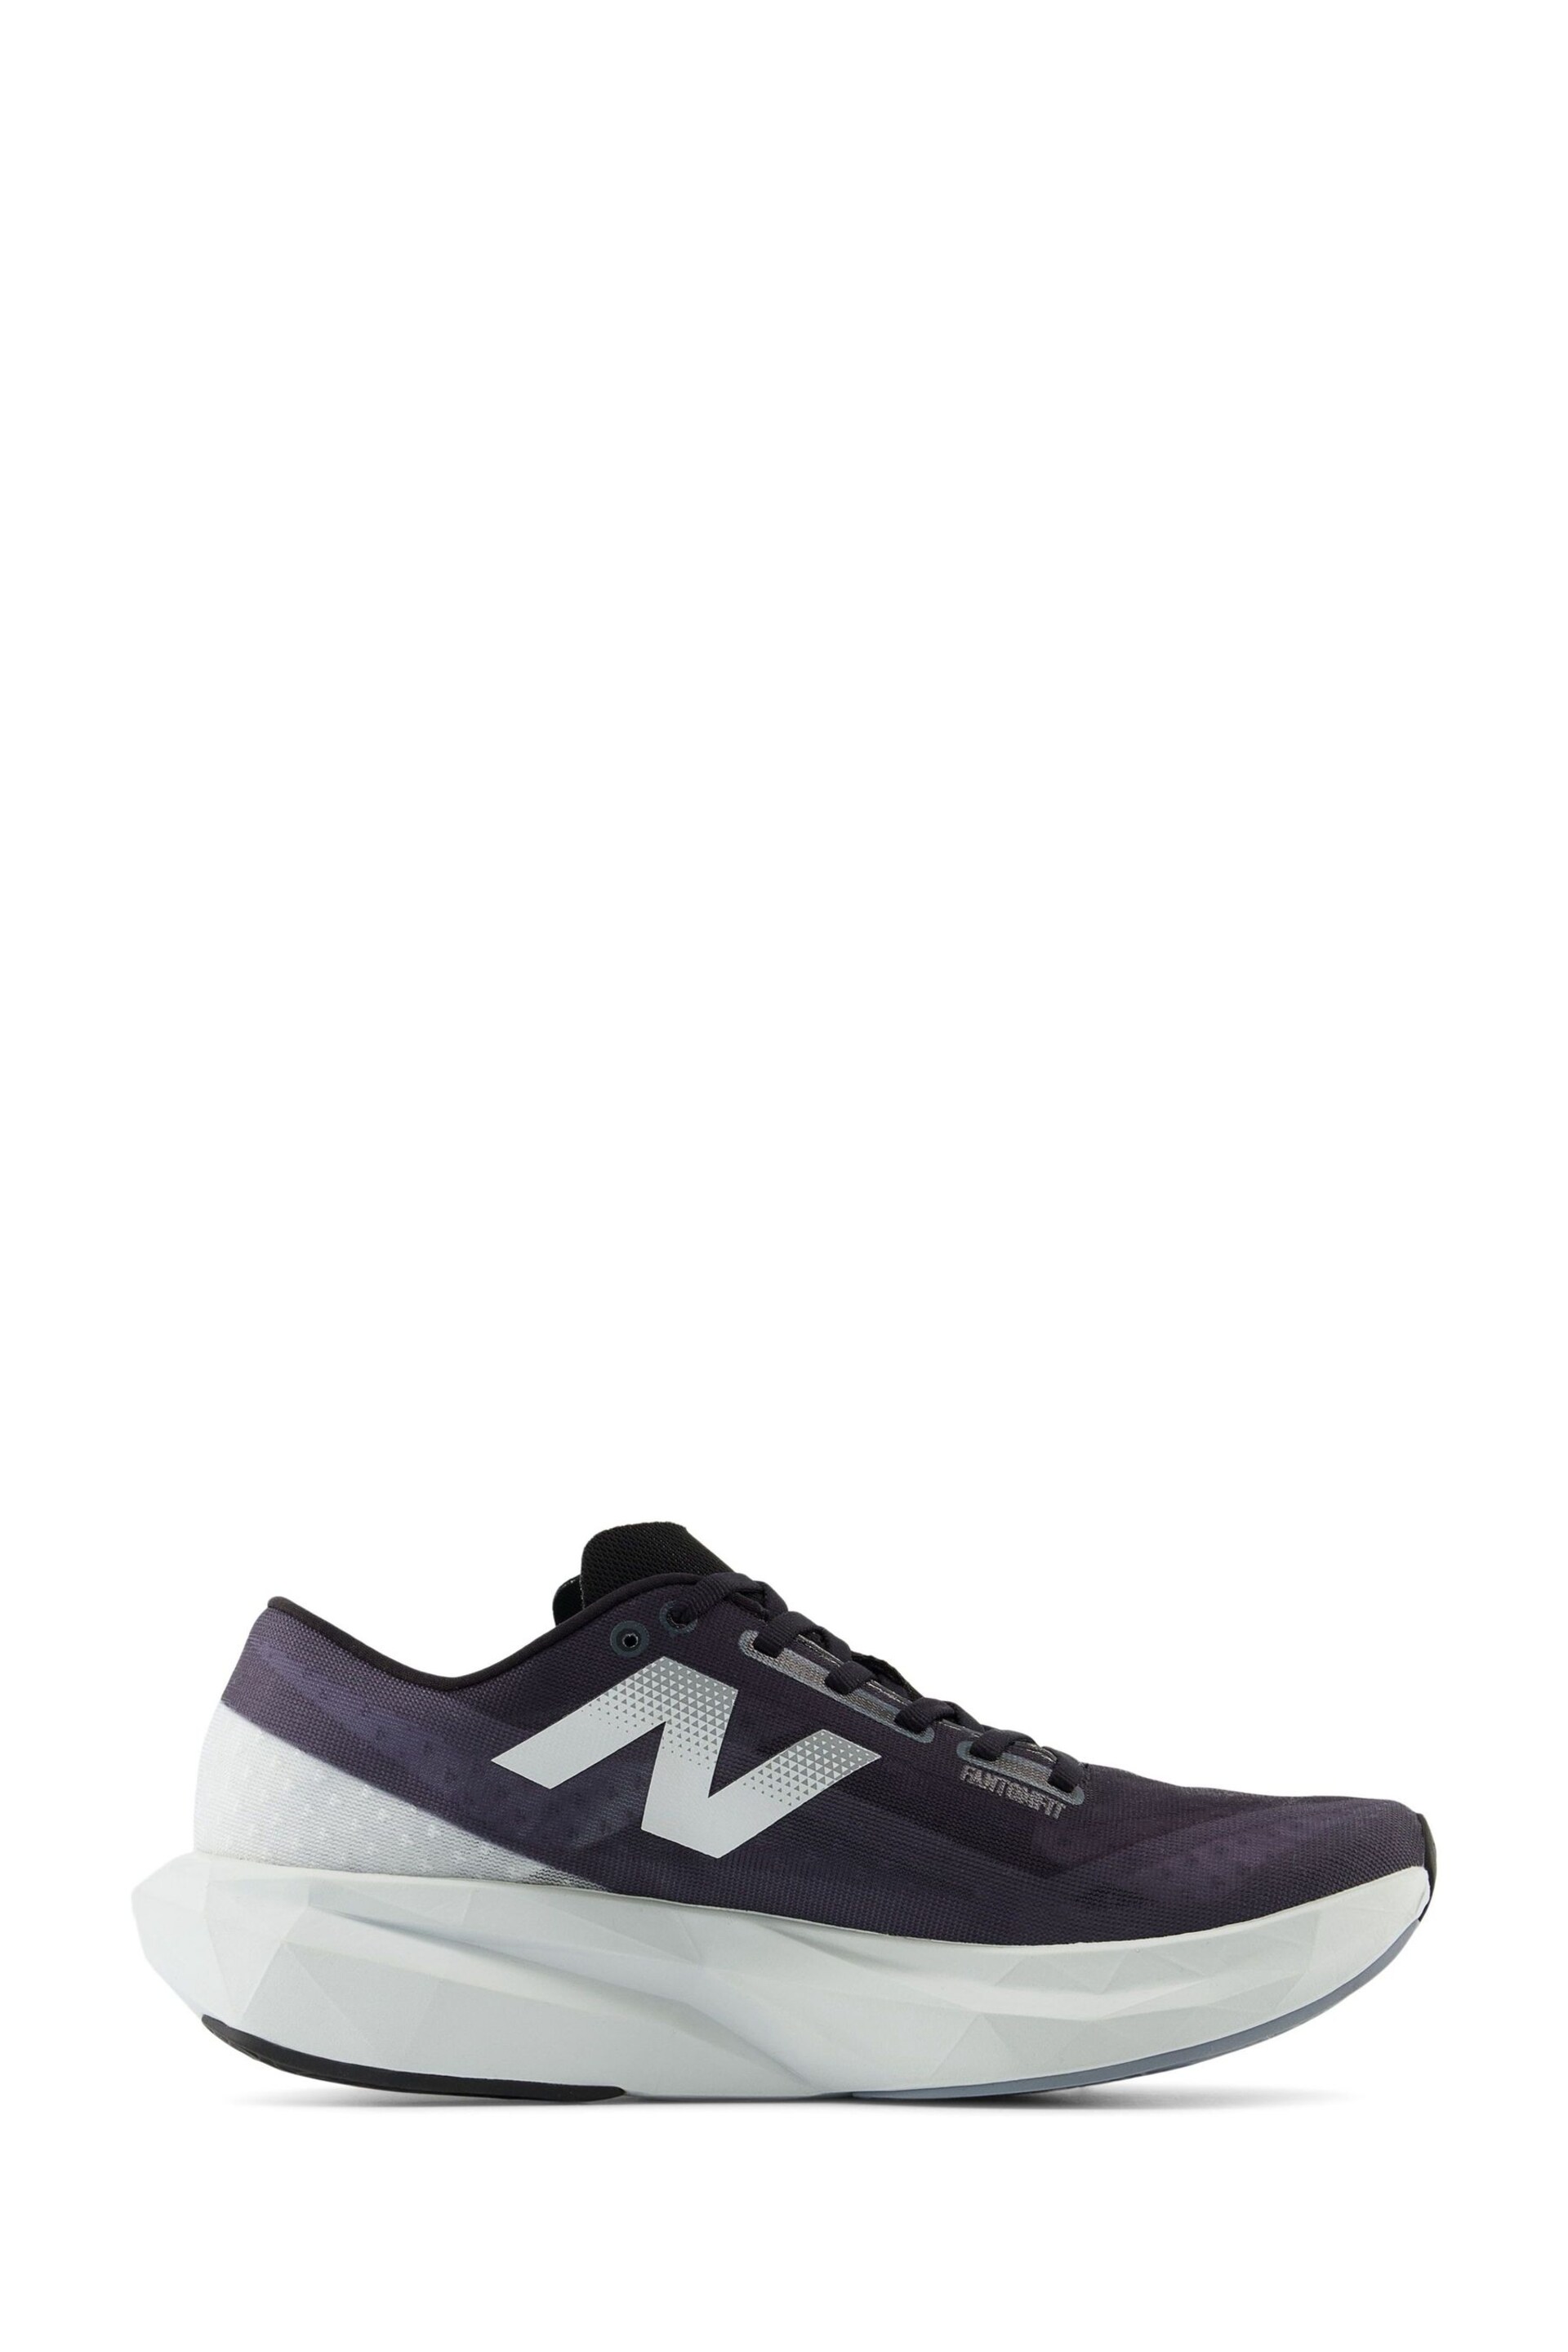 New Balance Grey Mens Fuelcell Rebel Trainers - Image 3 of 12